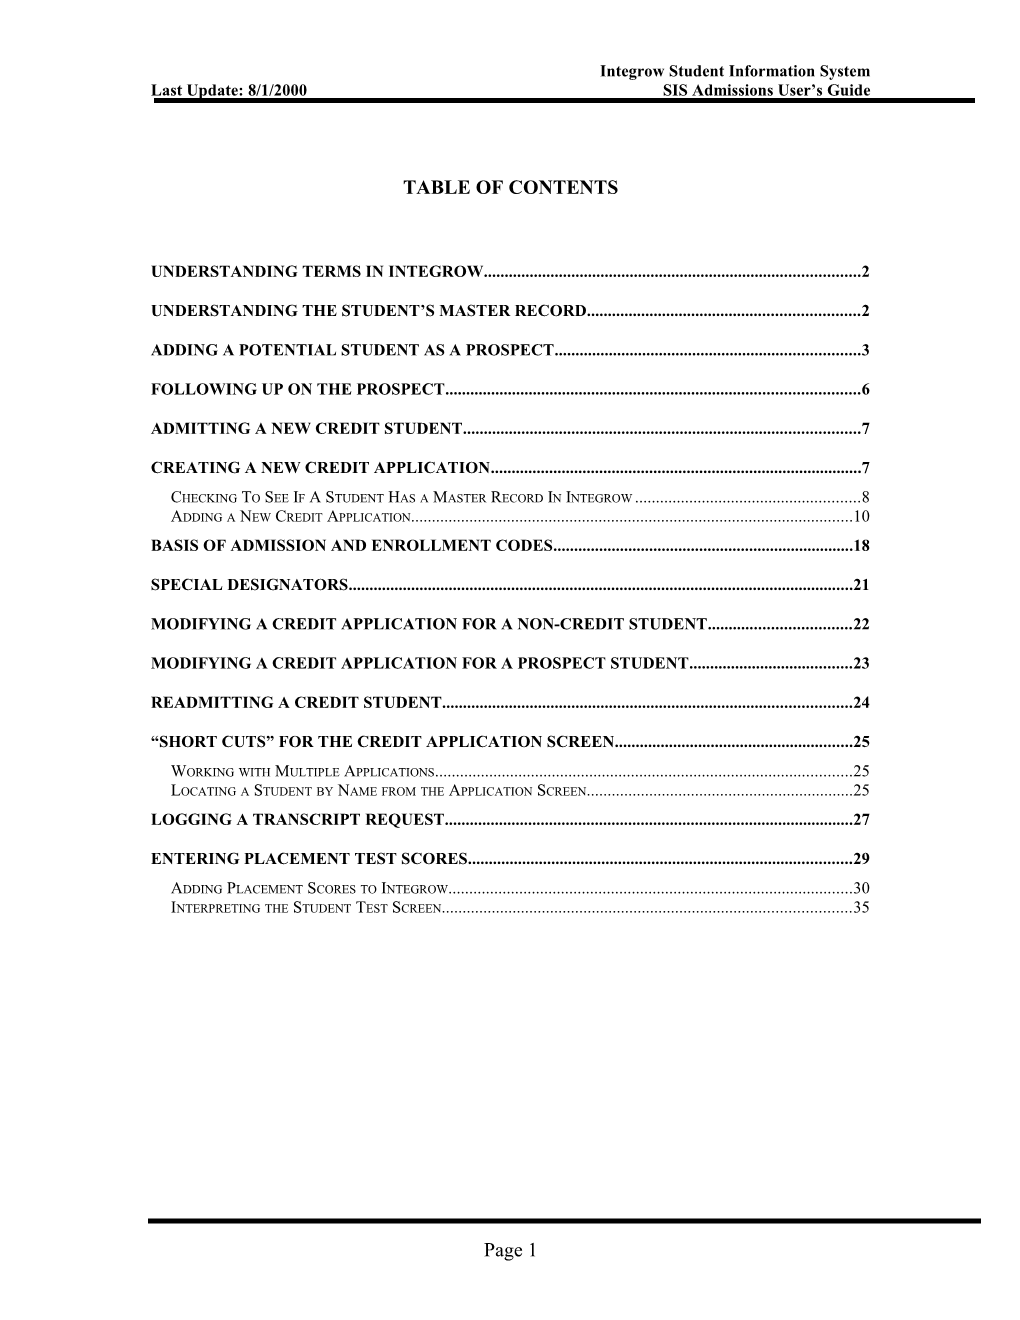 Table of Contents s181